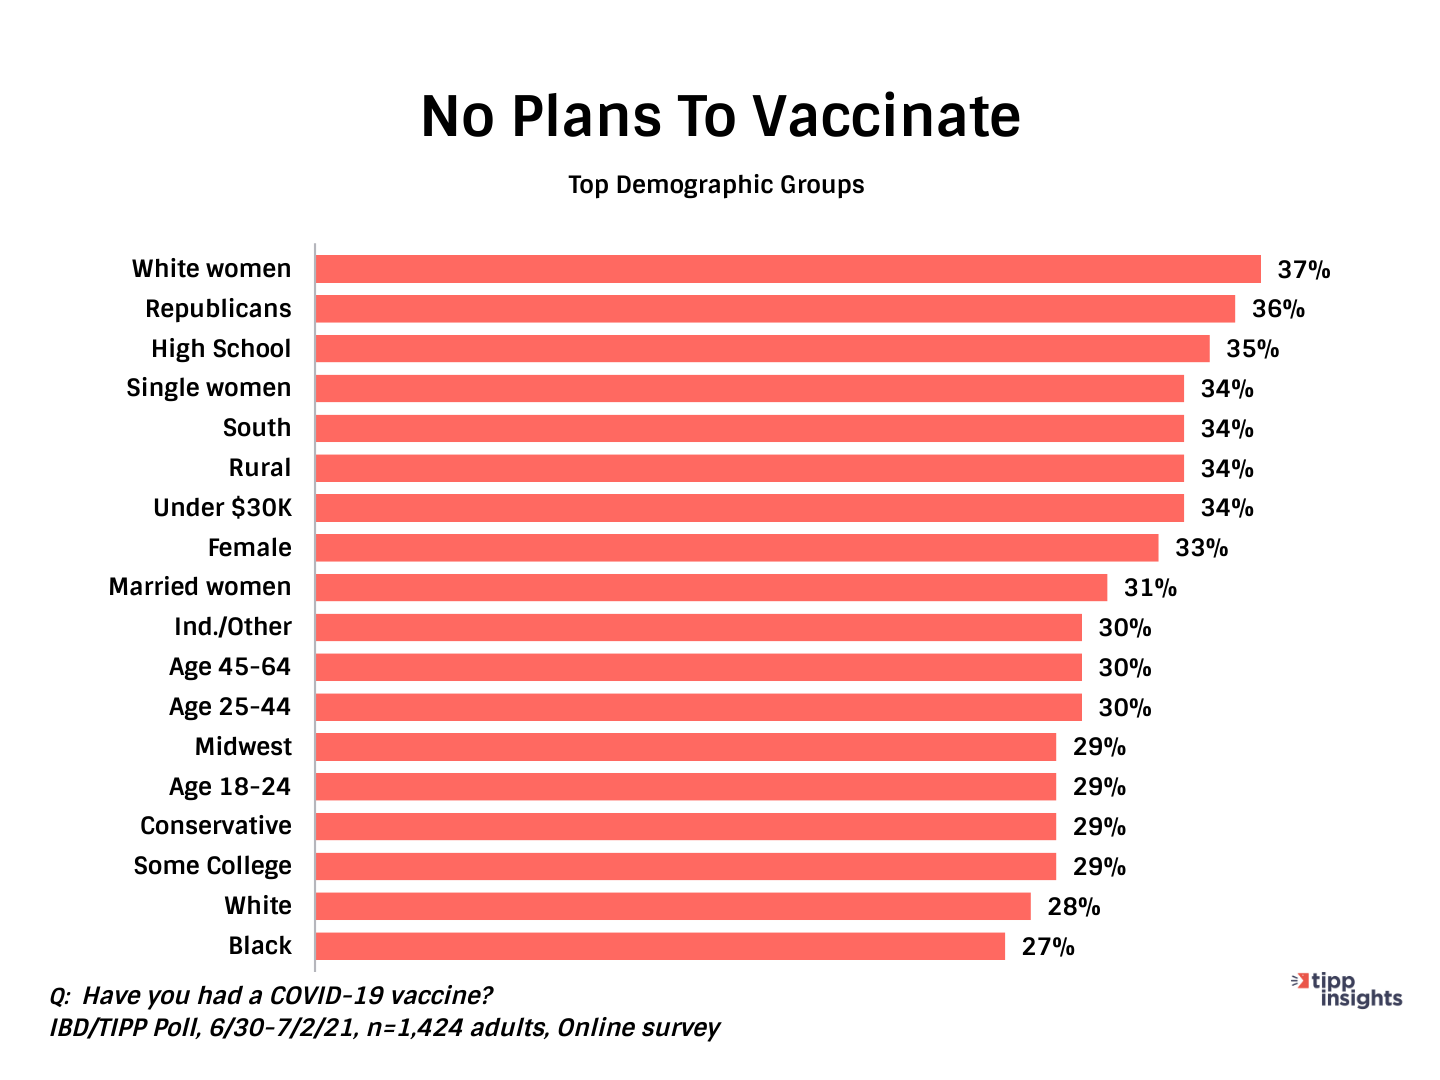 TIPP Poll Results: Americans with No plans to vaccinate, demographic breakdown